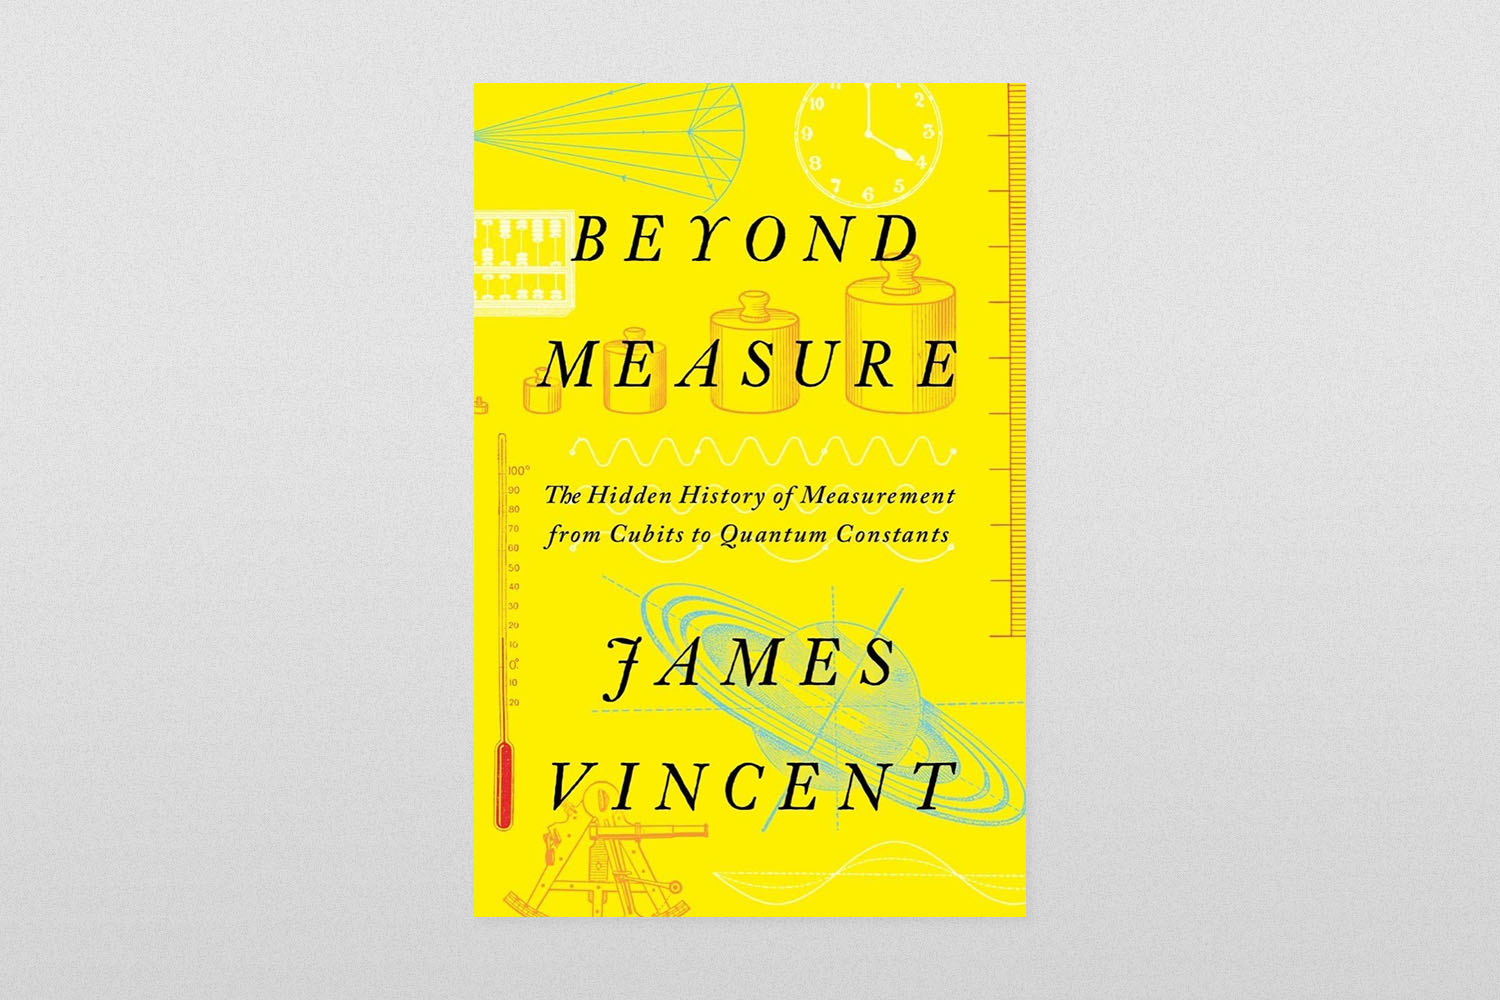 Beyond Measure- The Hidden History of Measurement from Cubits to Quantum Constants